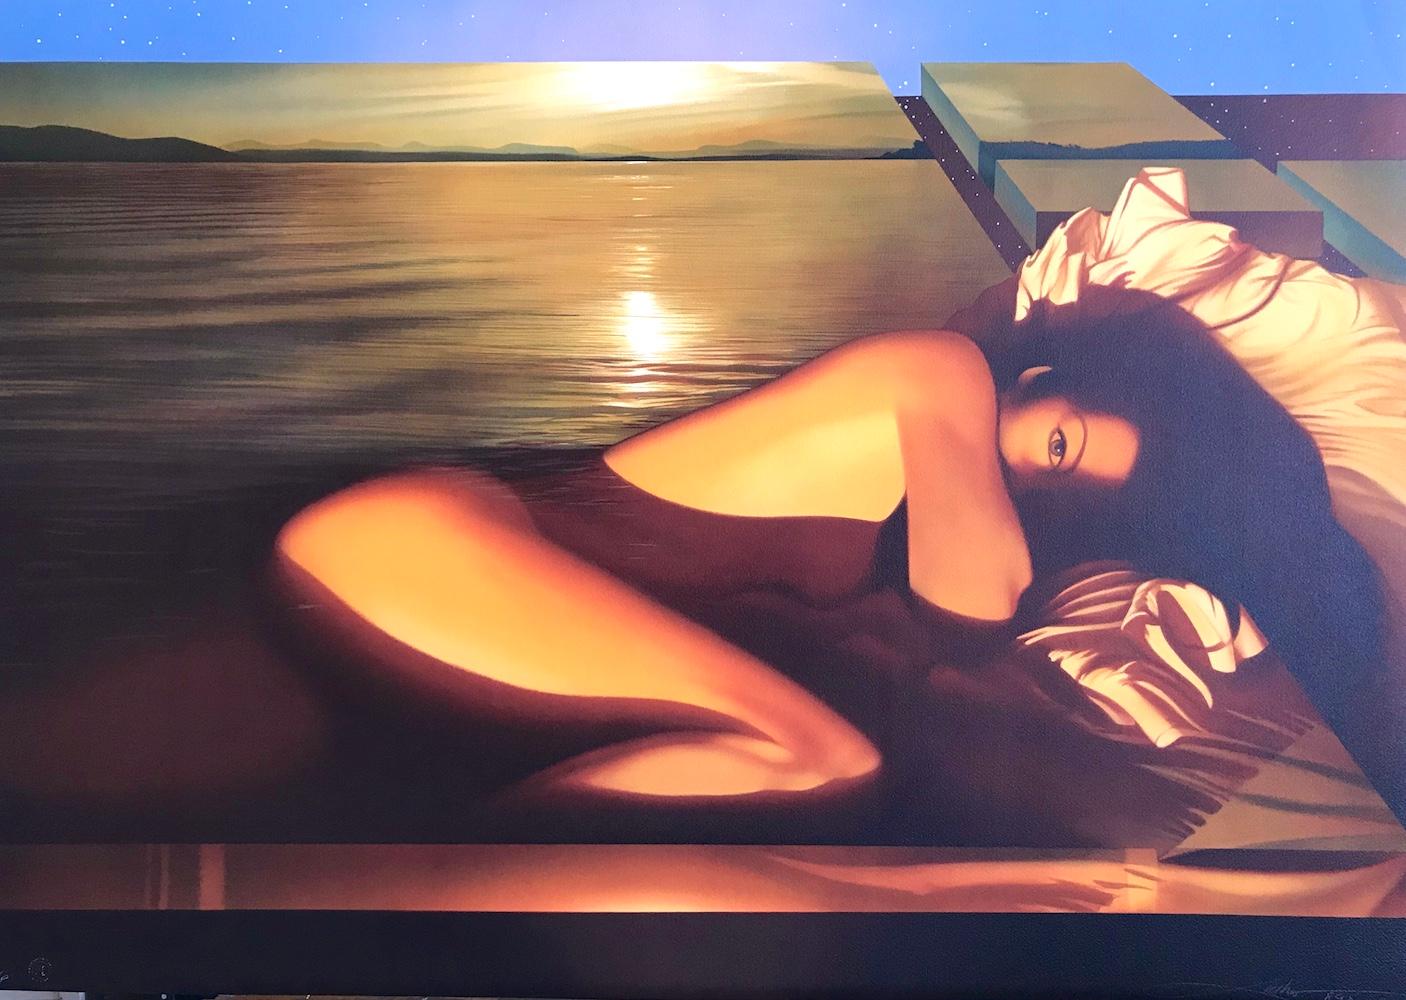 SPELLBOUND Signed Lithograph, Reclining Nude Woman, Golden Sunset, Erotic Art